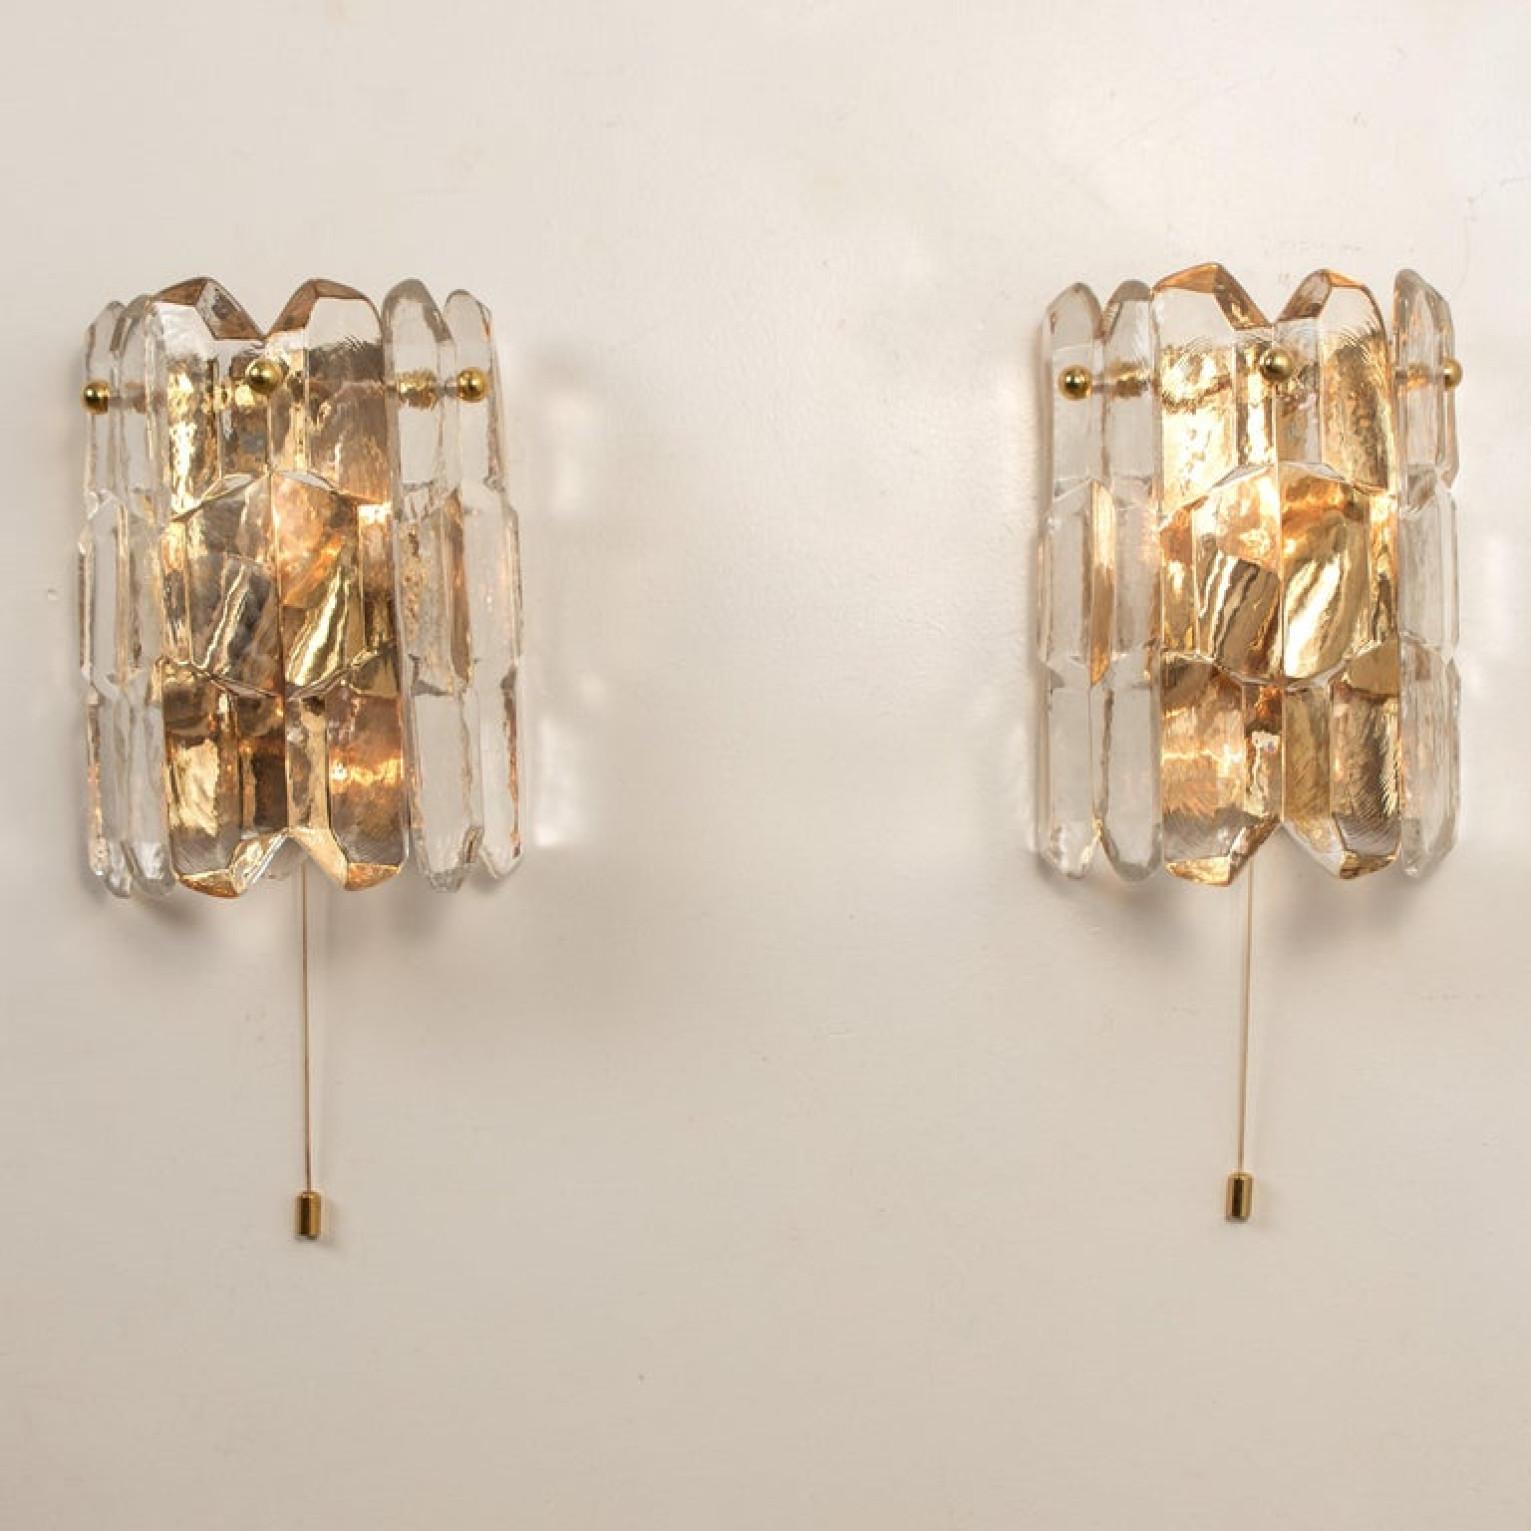 Austrian 1 of 2 Pair of J.T. Kalmar 'Palazzo' Wall Light Fixtures Gilt Brass and Glass For Sale